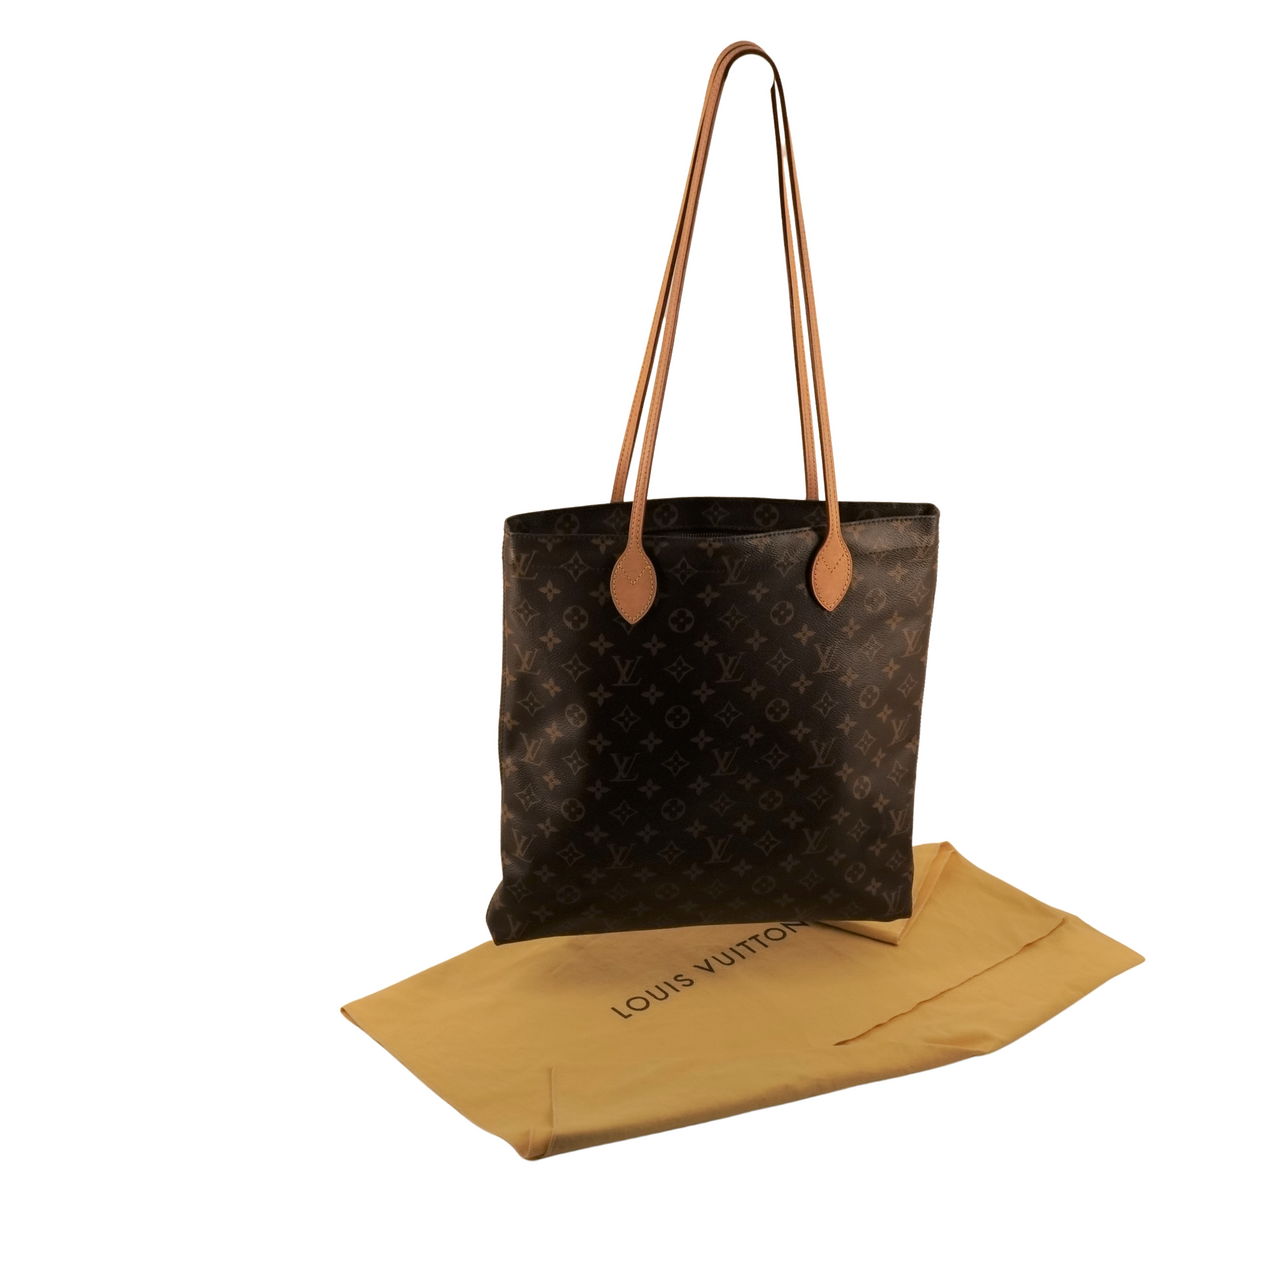 Chic Louis Vuitton District Messenger Bag PM Black Monogram - Free Shipping  USA - The Happy Coin